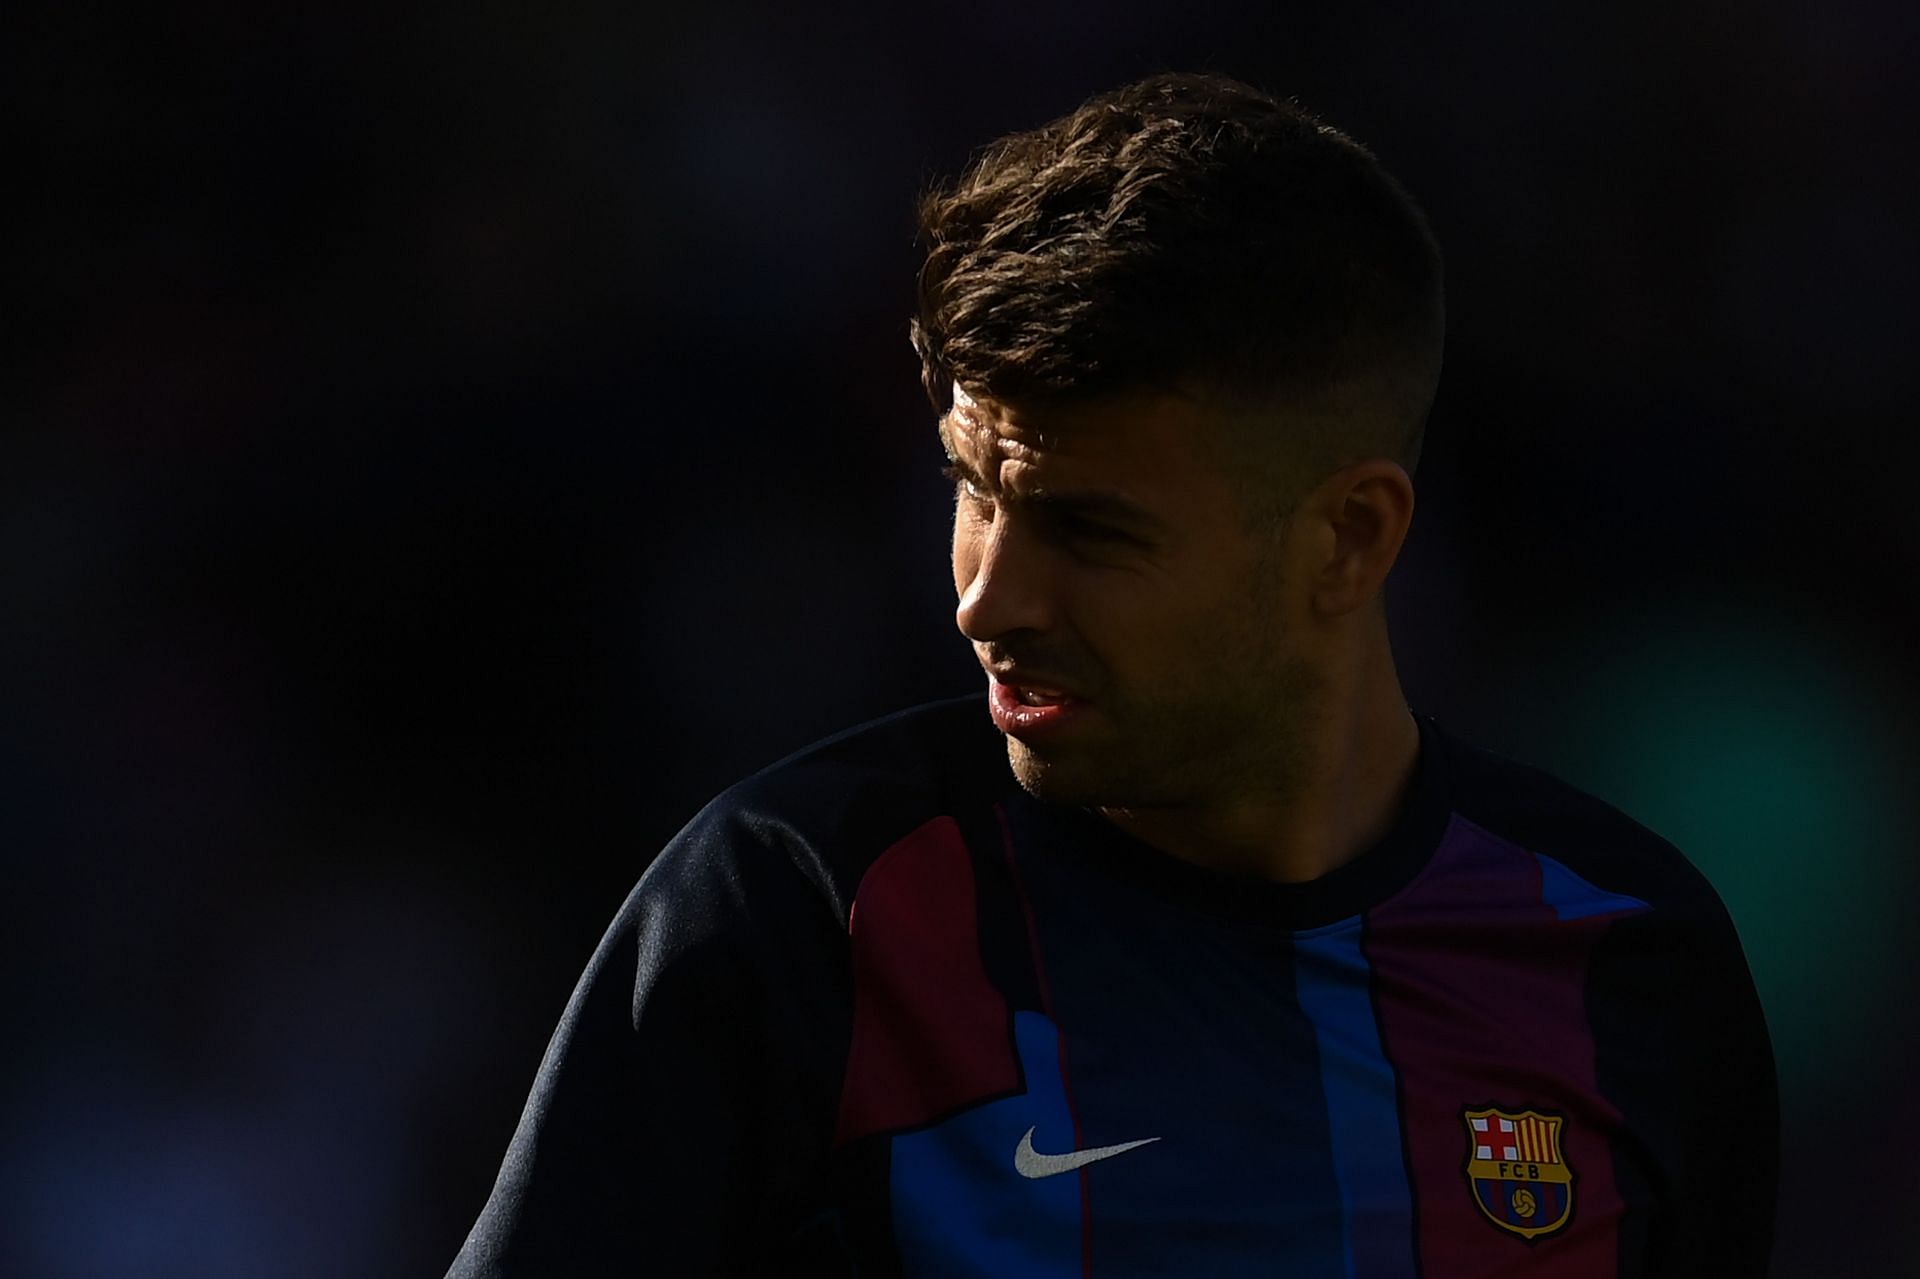 Gerard Pique has won the Champions League with two different clubs.